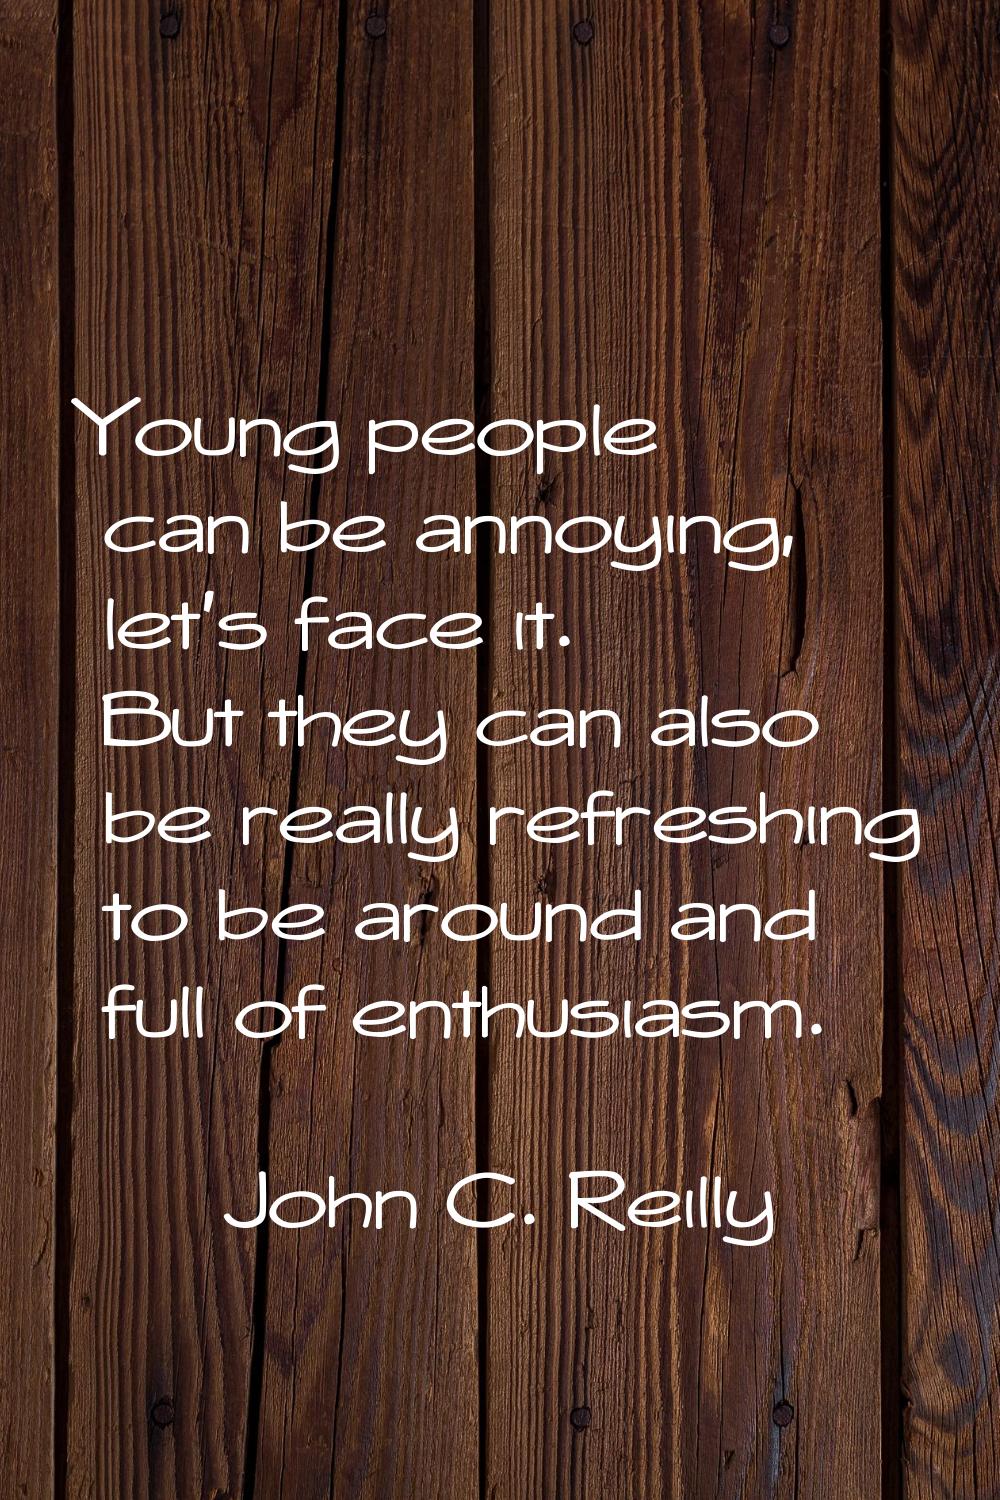 Young people can be annoying, let's face it. But they can also be really refreshing to be around an